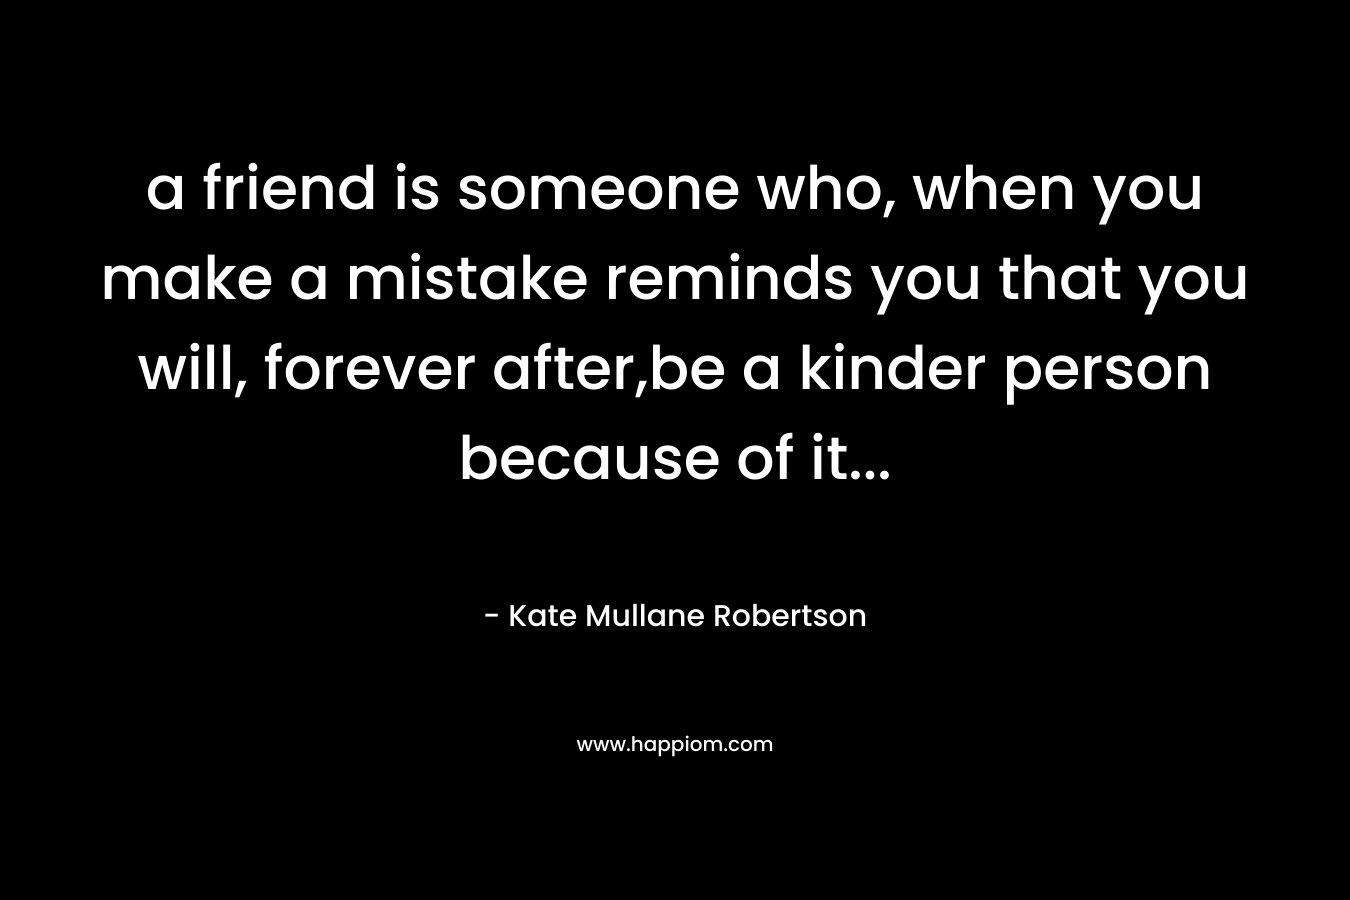 a friend is someone who, when you make a mistake reminds you that you will, forever after,be a kinder person because of it… – Kate Mullane Robertson